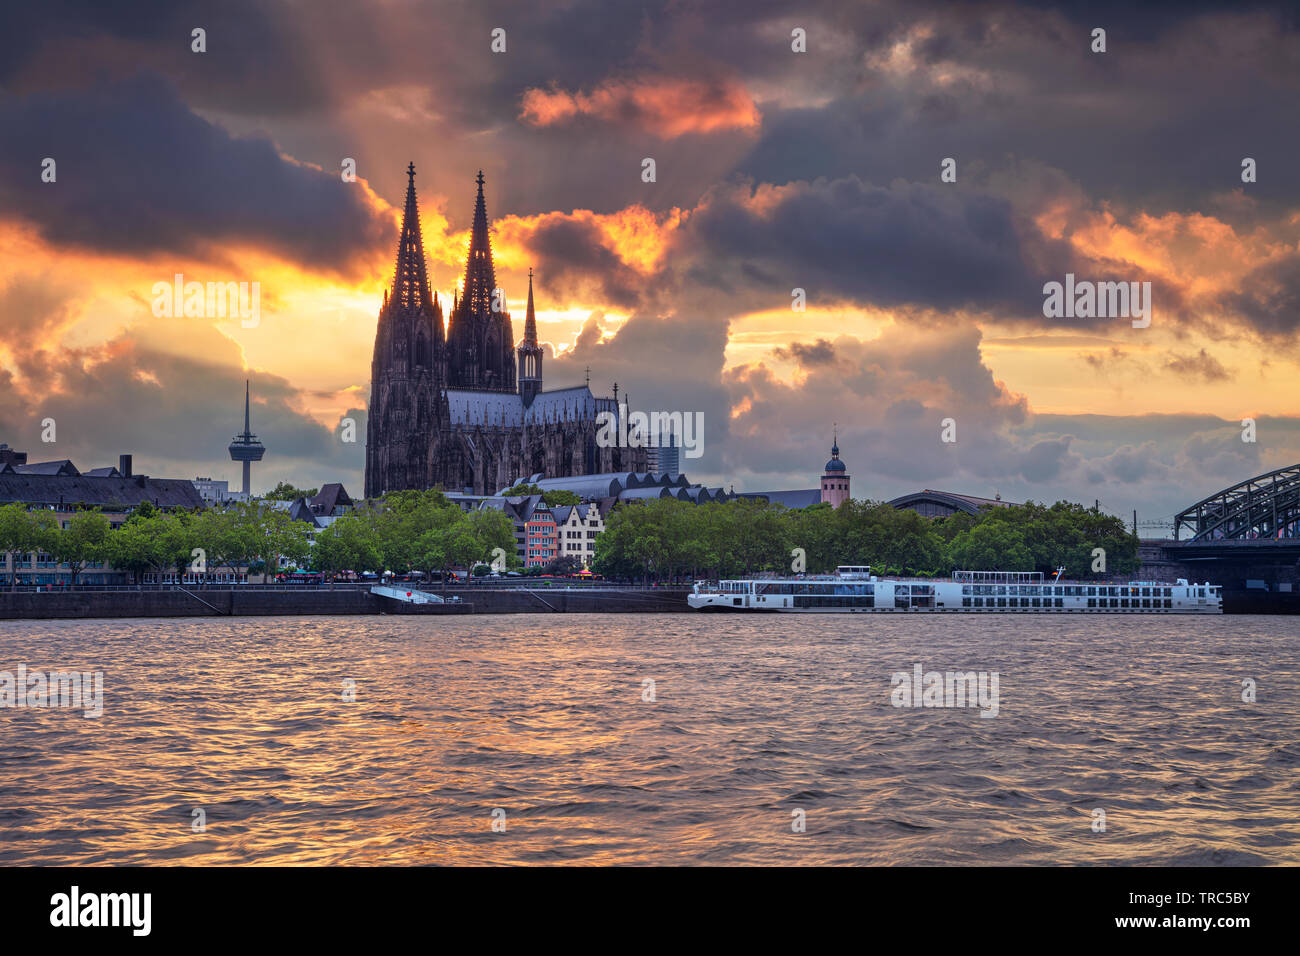 Cologne, Germany. Cityscape image of Cologne, Germany with Cologne Cathedral during sunset. Stock Photo